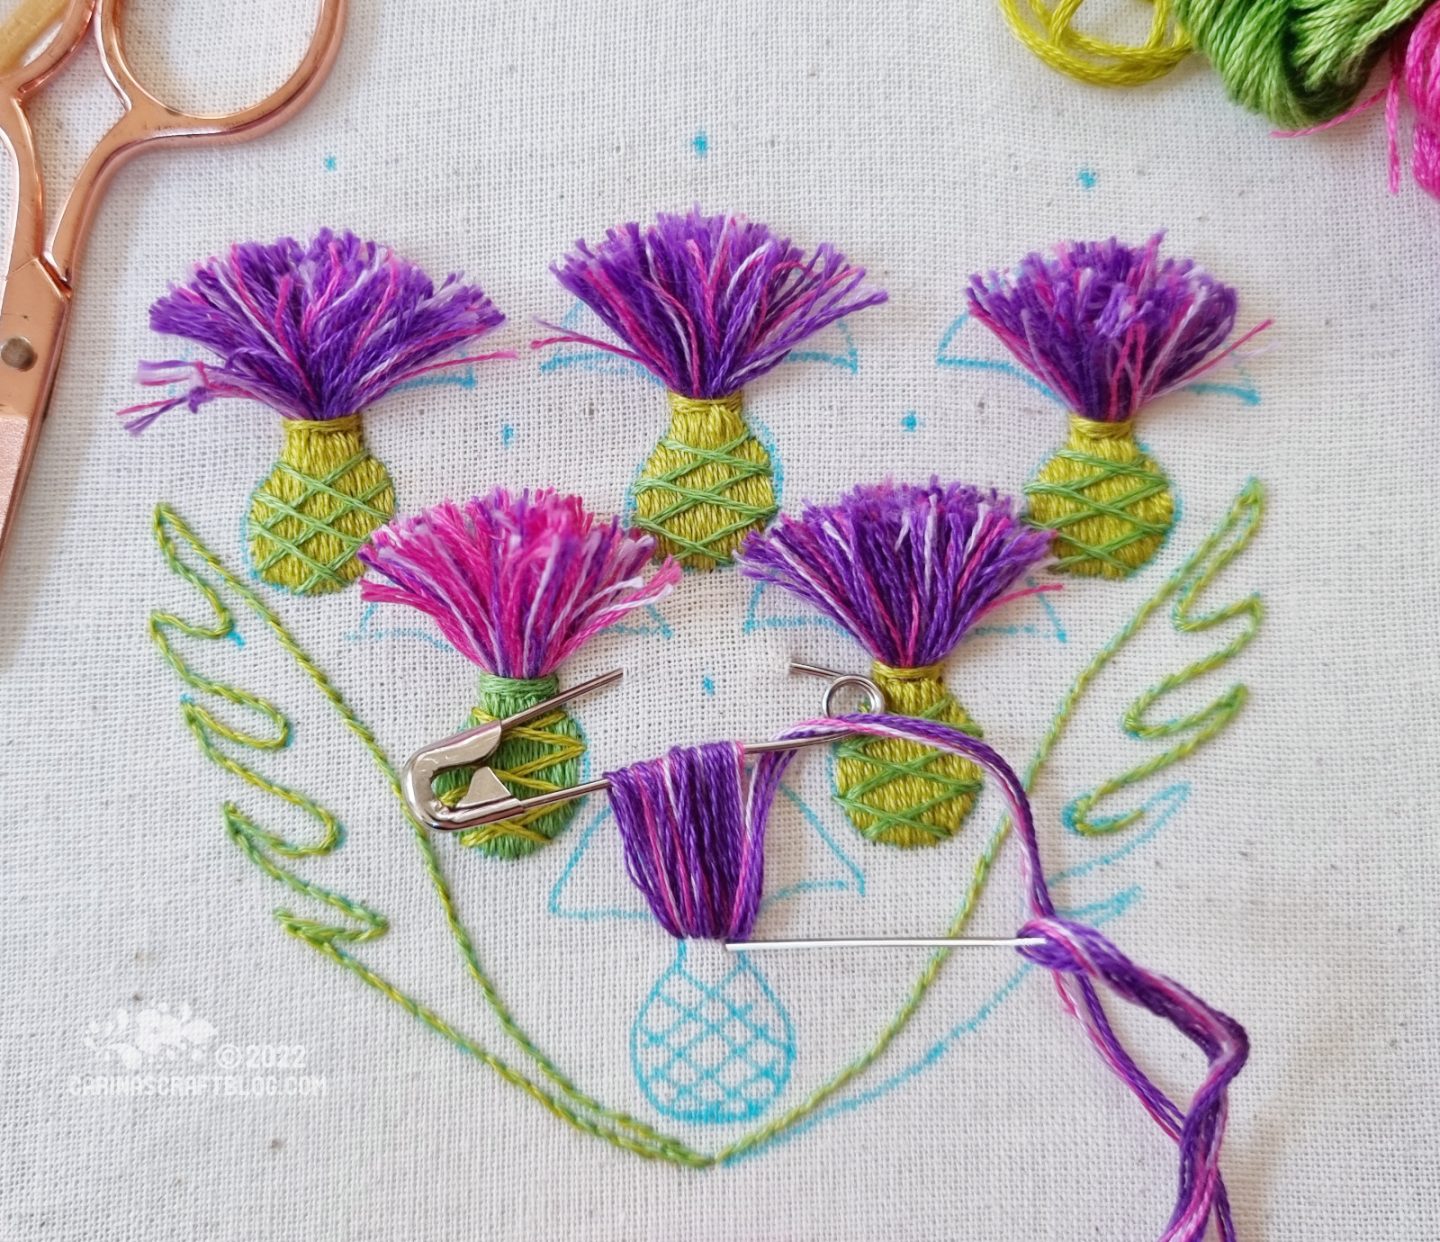 Hand Embroidery for Beginners Step by Step: Learn 14 Stitches and